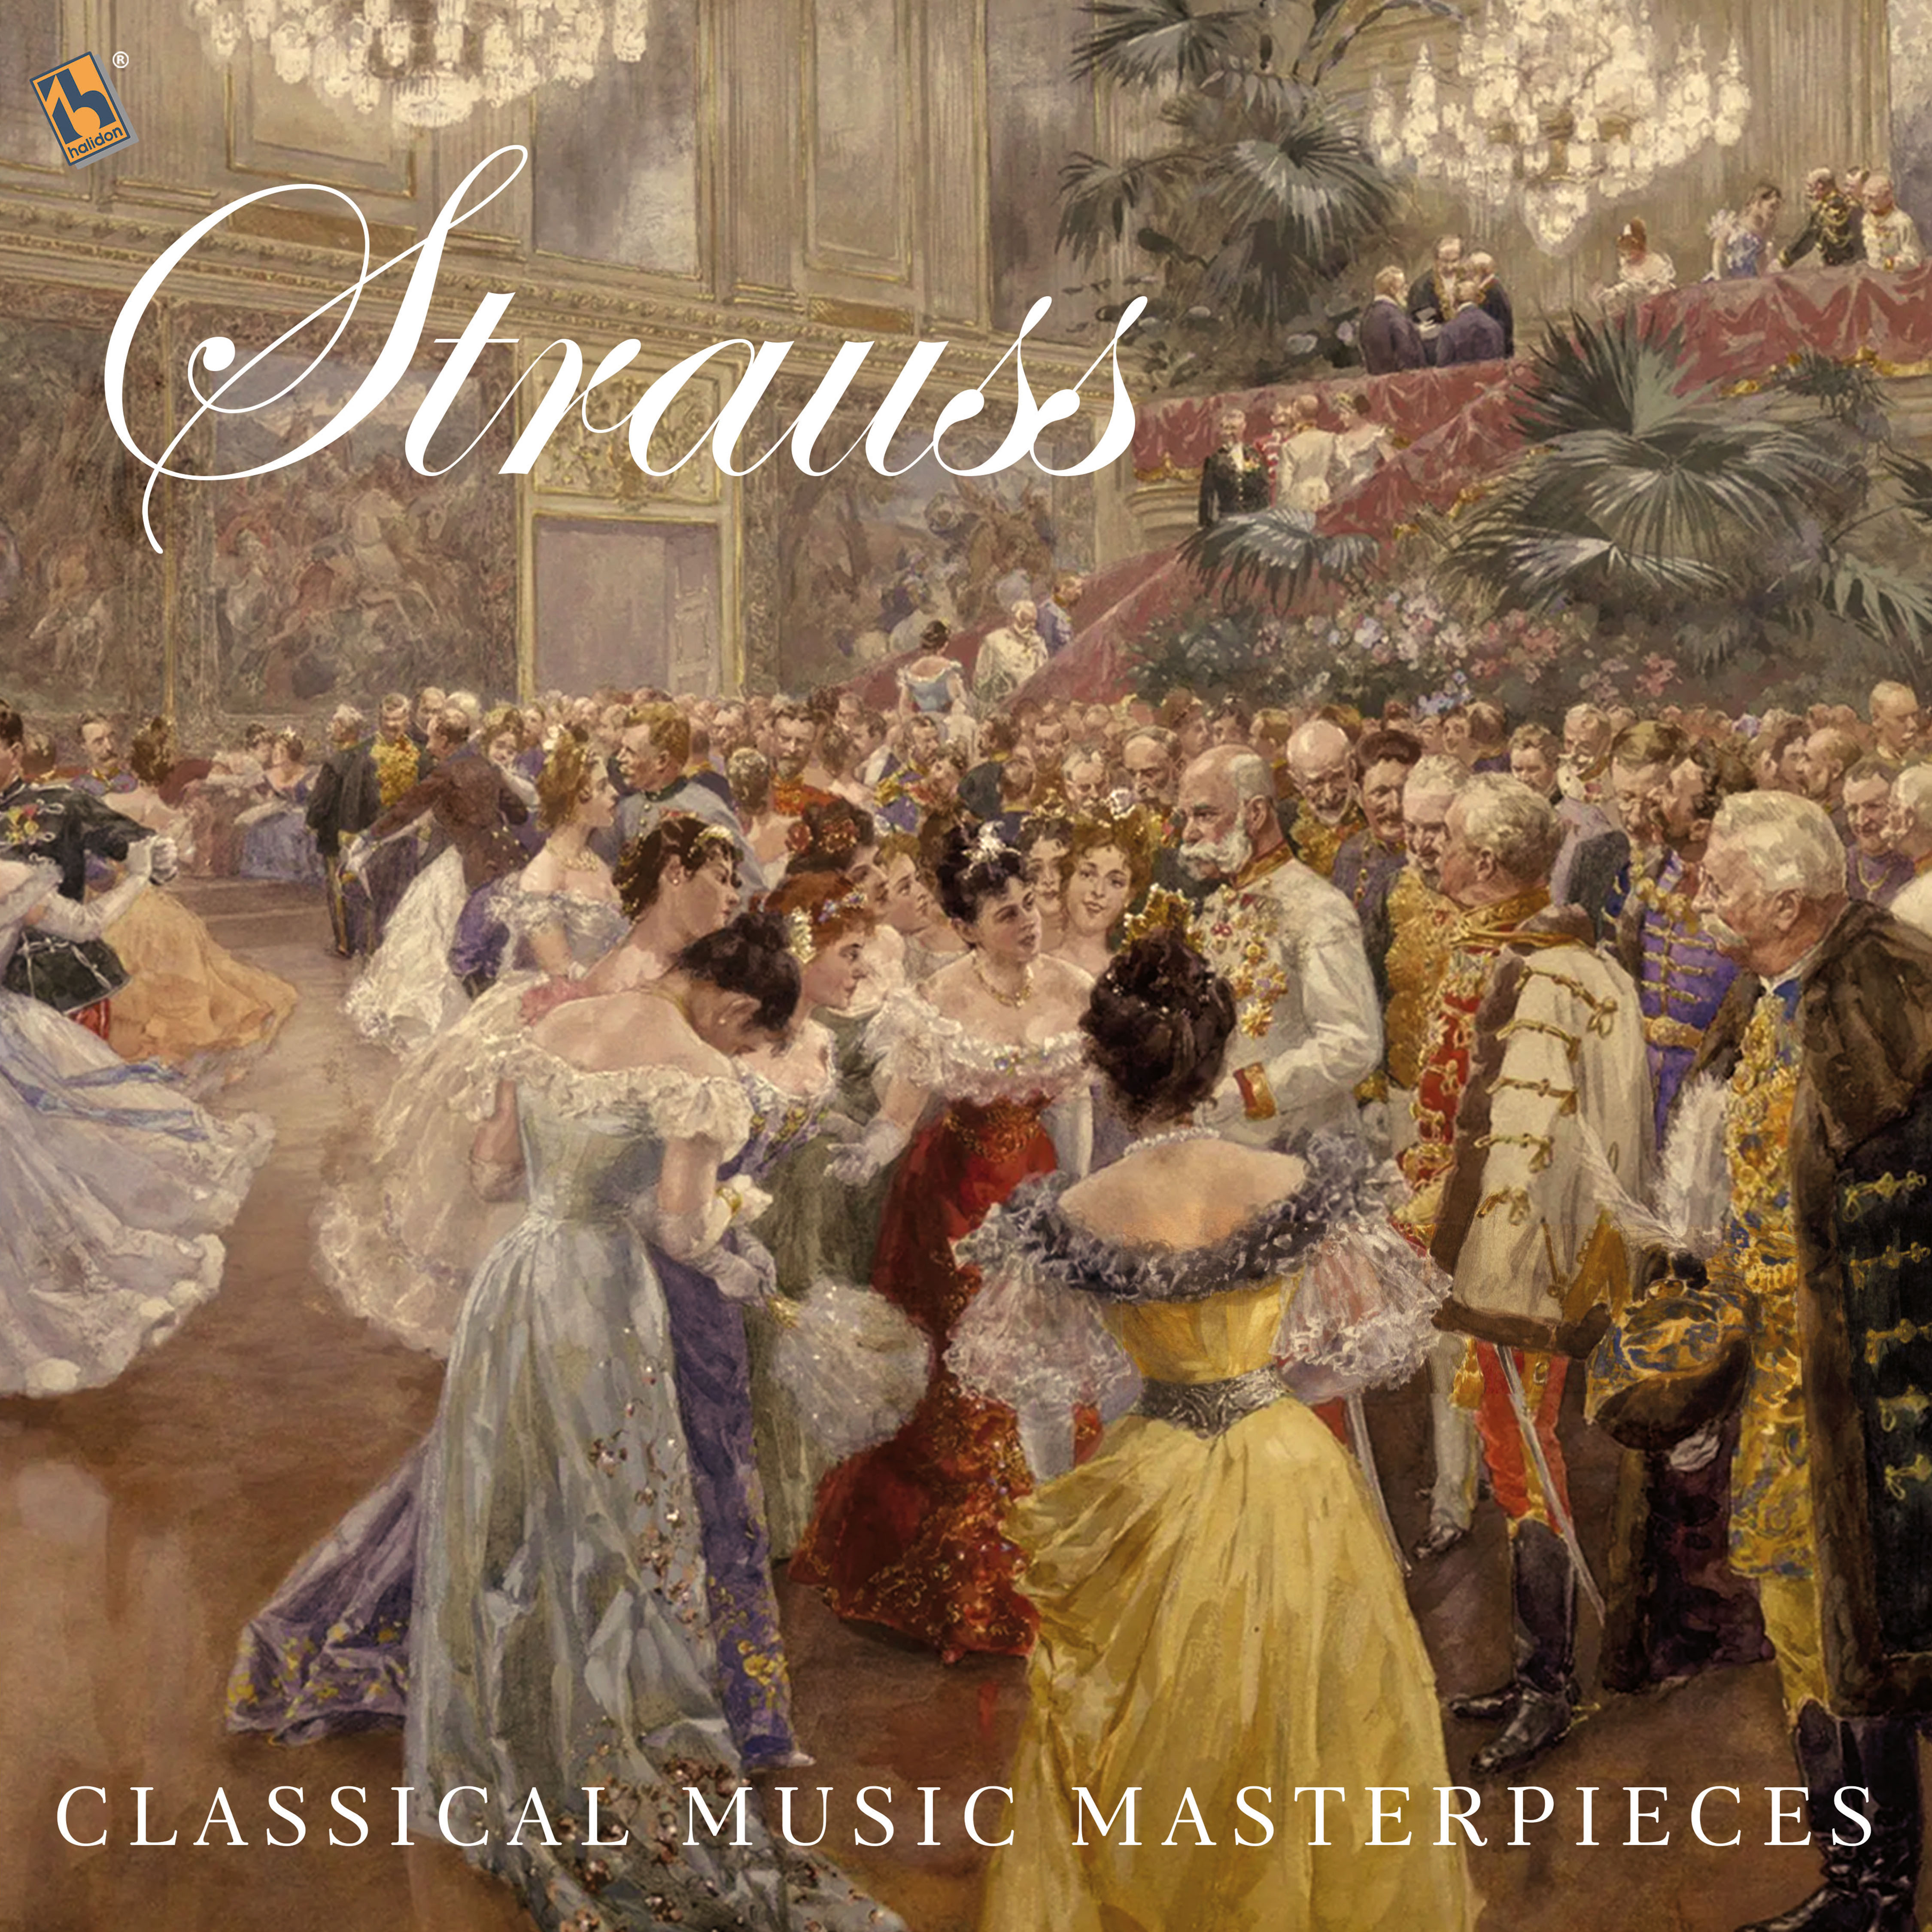 Strauss II: Classical Music Masterpieces